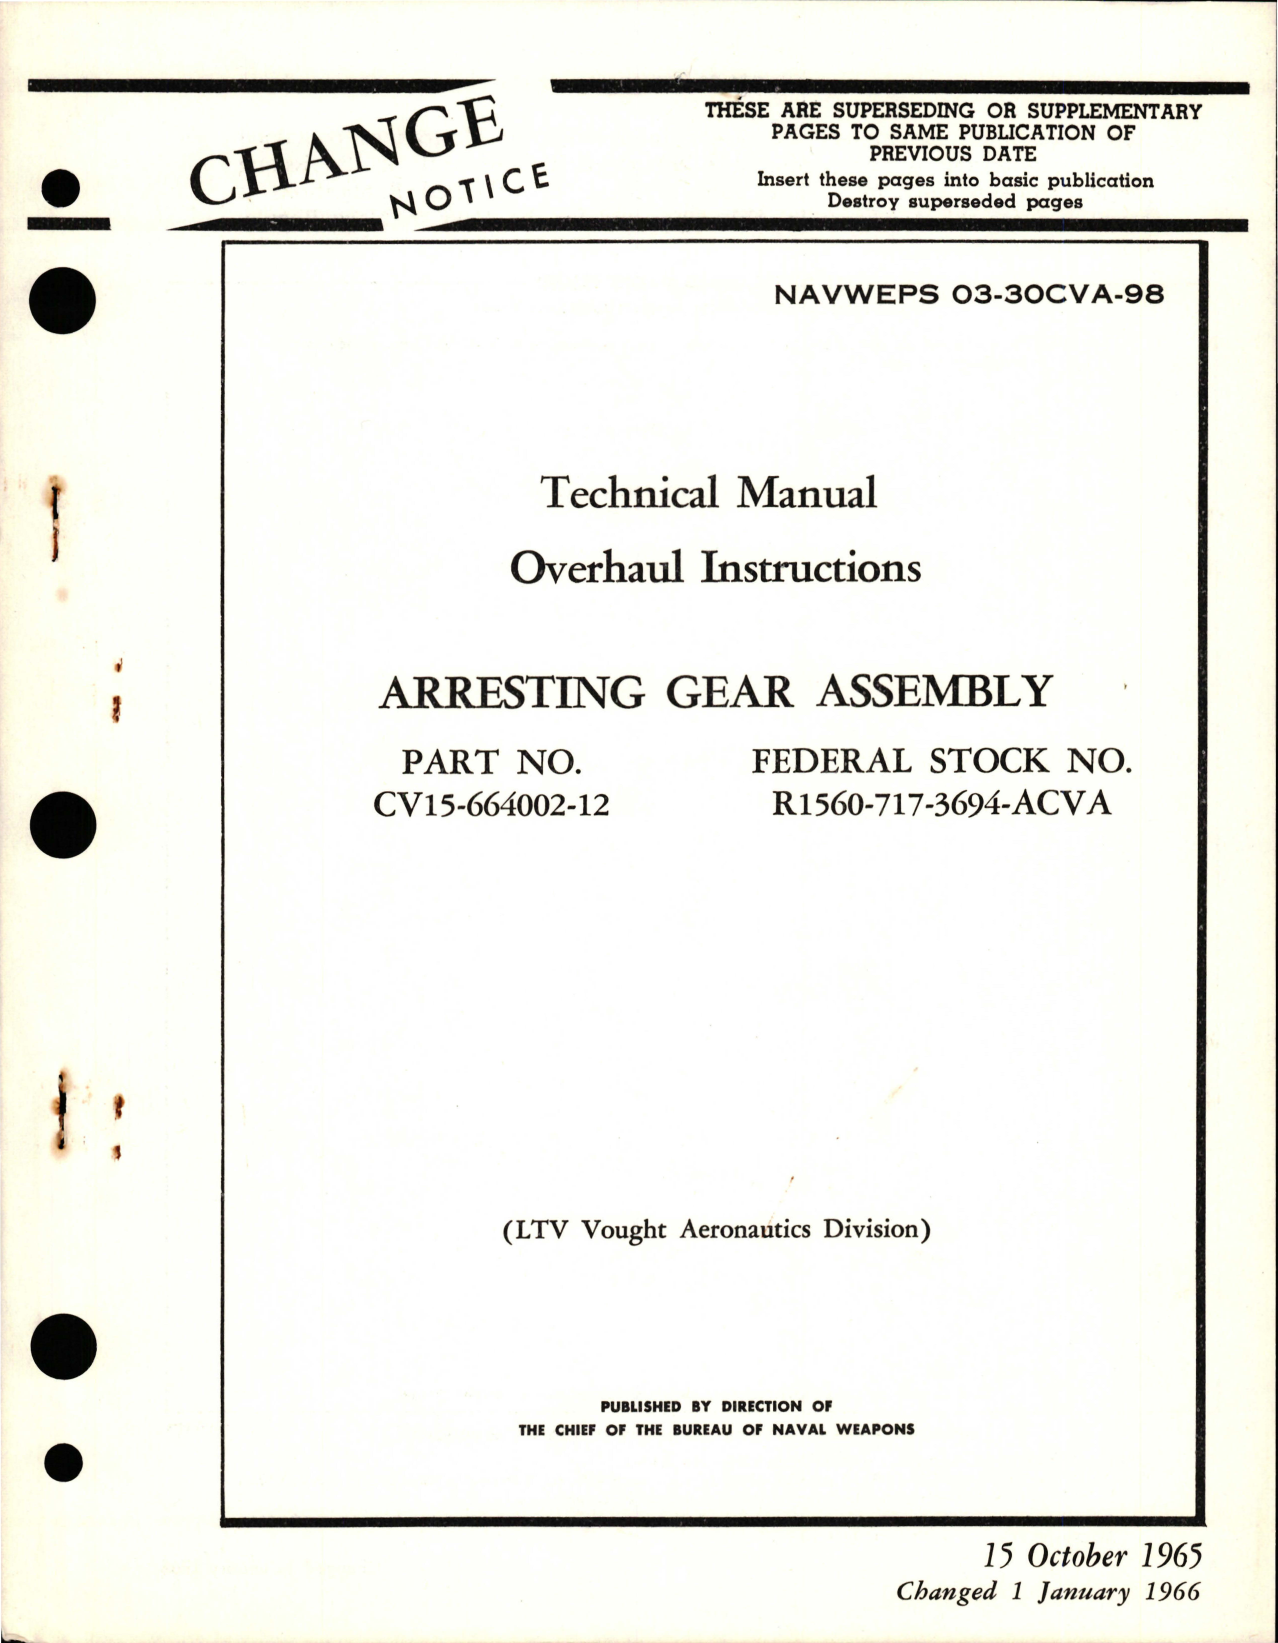 Sample page 1 from AirCorps Library document: Overhaul Instructions for Arresting Gear Assembly - Part CV15-664002-12